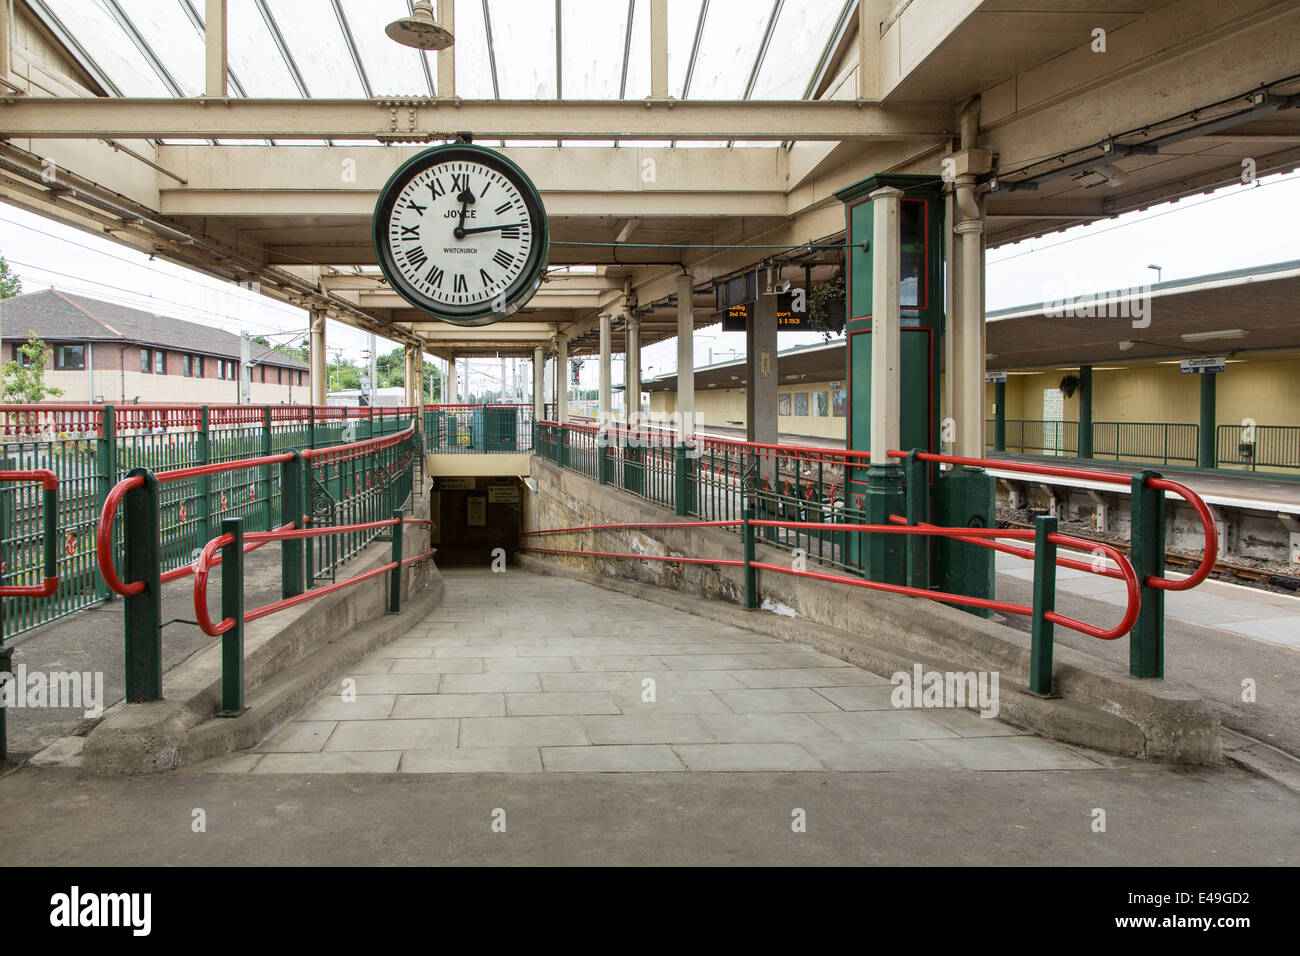 Carnforth Station, Lancashire, showing the famous platform and clock, featured in the film 'Brief Encounter' with Celia Johnson, Trevor Howard, 1945 Stock Photo